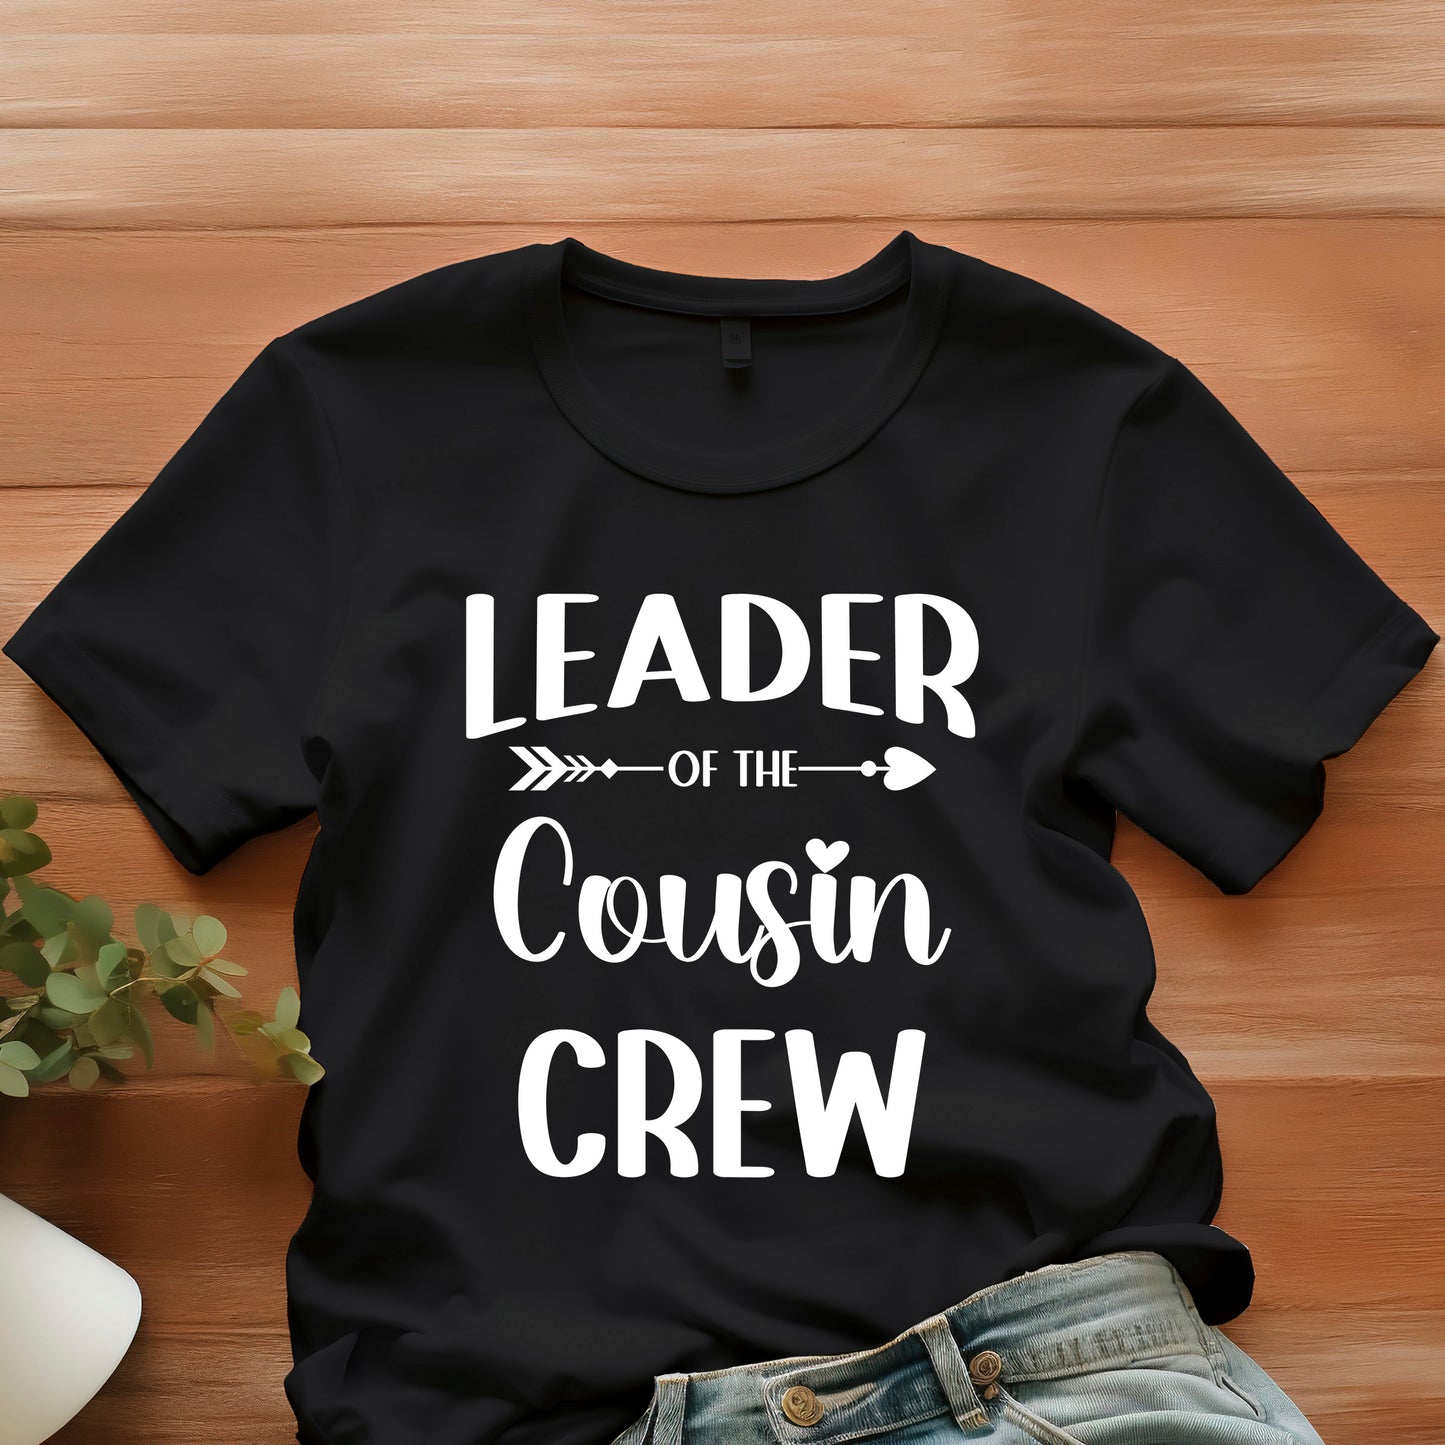 Leader Of The Cousin Crew Shirt